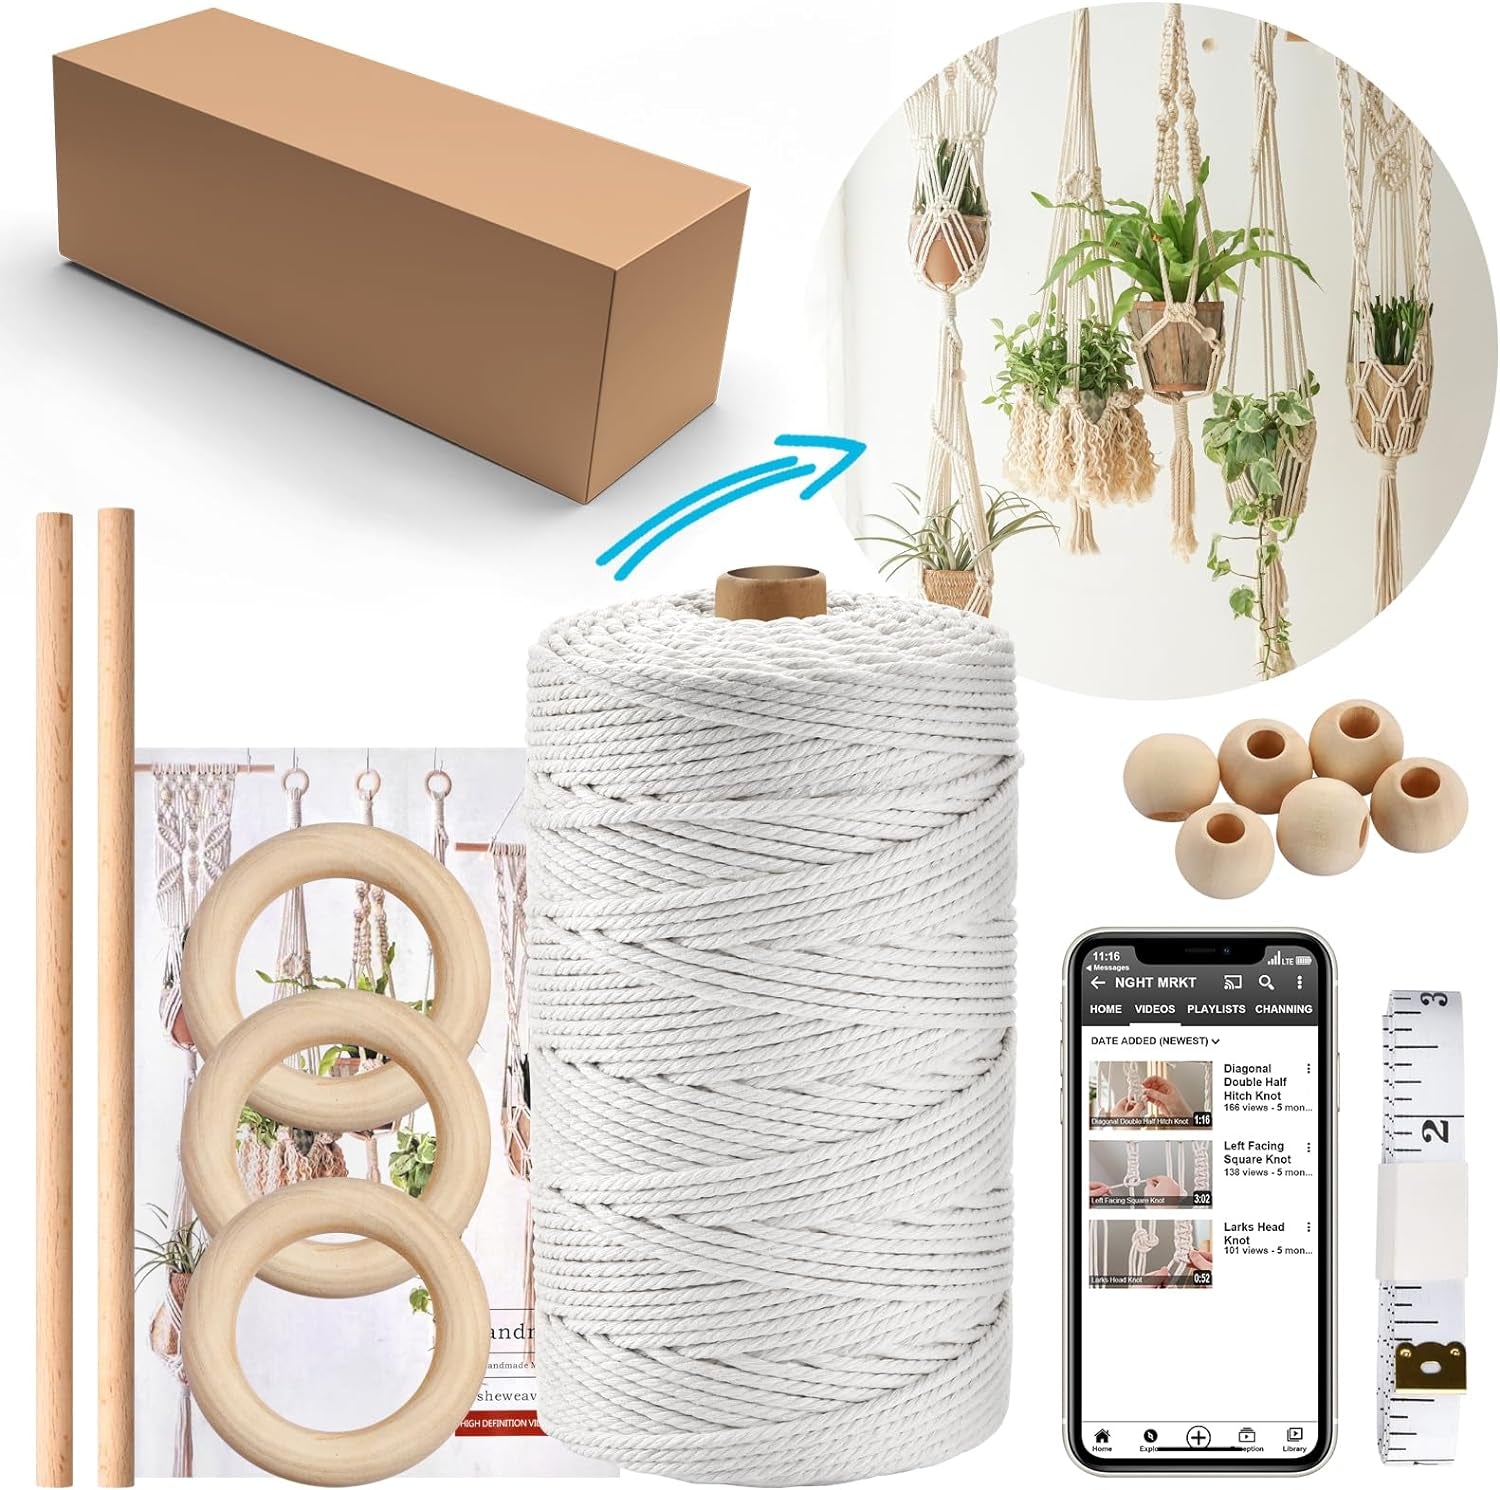 121Pcs Macrame Kit, Macrame Supplies 3Mm X 109Yards Macrame Cord for Macrame Kits for Adults Beginners, with Accessories like 100Pcs Beads and 10Pcs Wooden Rings for Macrame Plant Hanger Kit